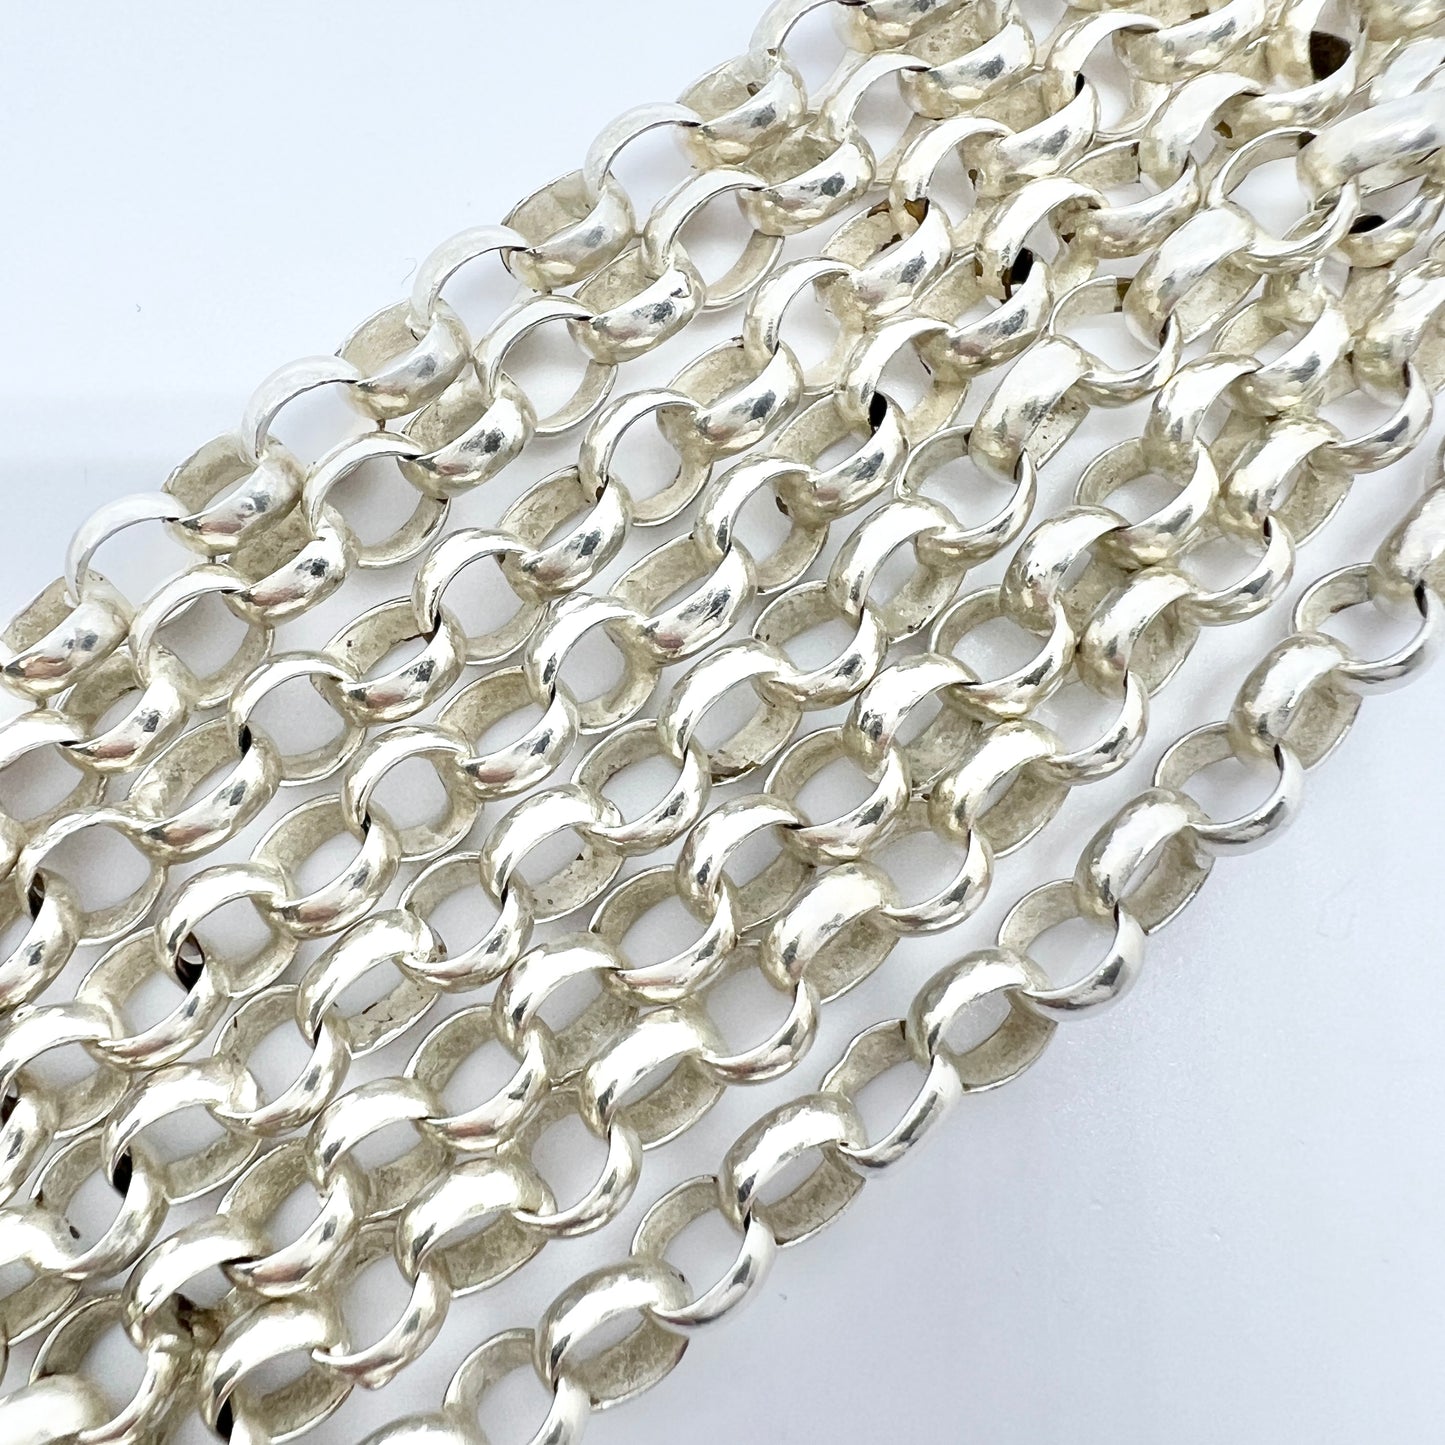 Antique Solid Silver 55 inch Longuard Chain Necklace.